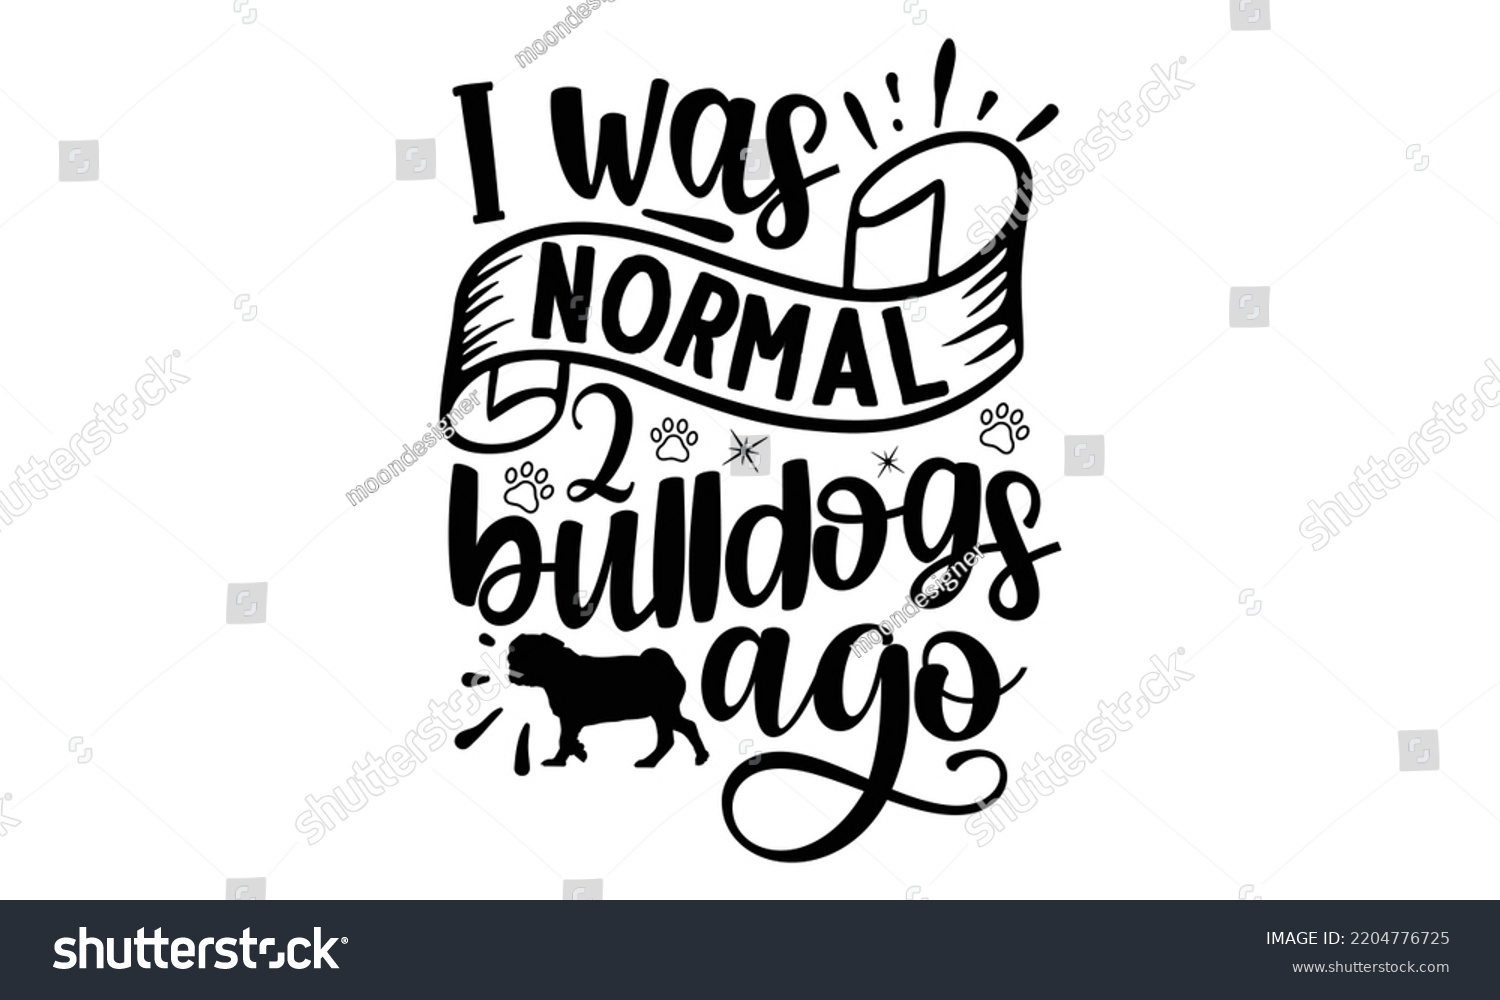 SVG of I was normal 2 bulldogs ago - Bullodog T-shirt and SVG Design,  Dog lover t shirt design gift for women, typography design, can you download this Design, svg Files for Cutting and Silhouette EPS, 10 svg